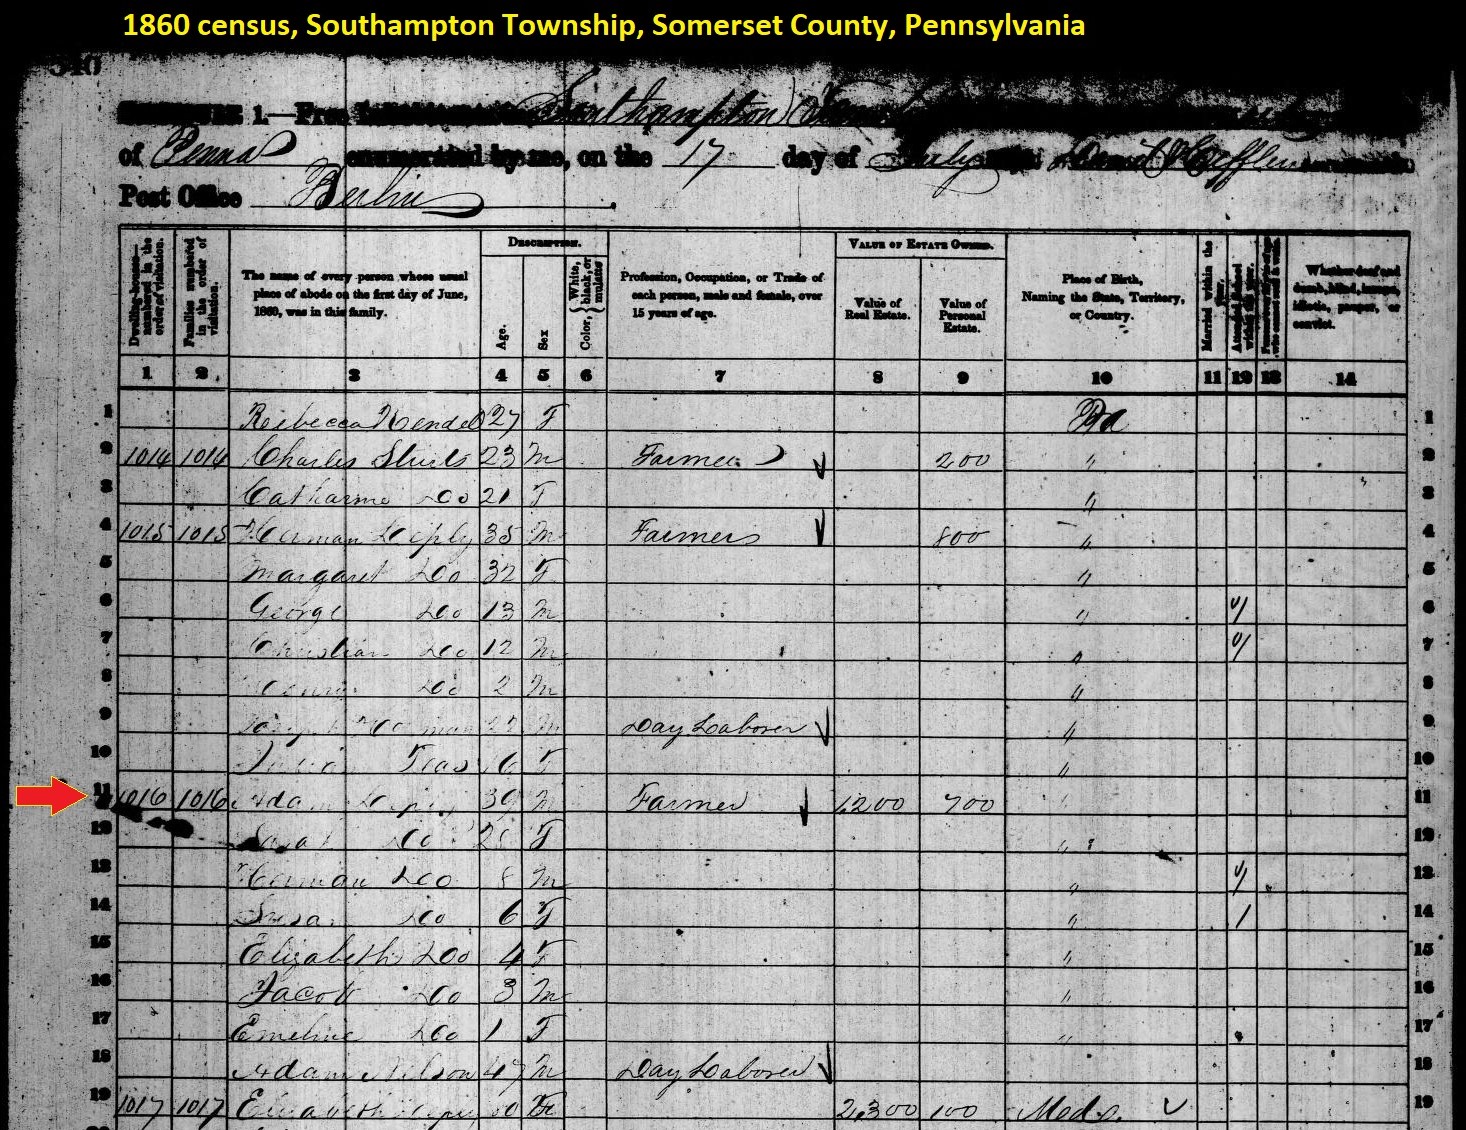 Excerpt from the 1860 census of Southampton Township, Somerset County, Pennsylvania.